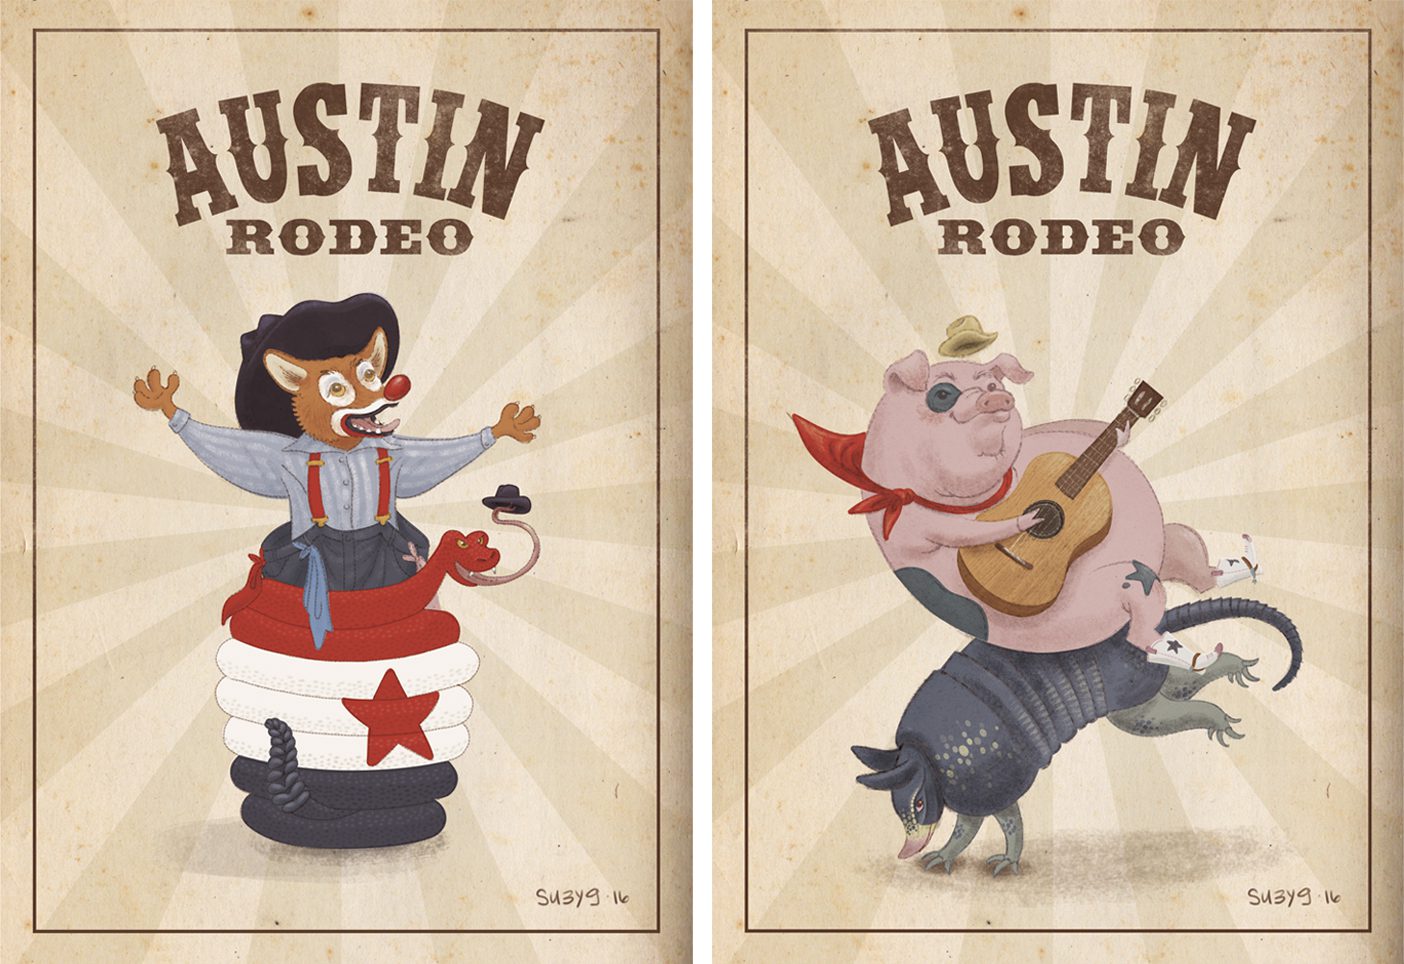 Rodeo posters featuring a pig playing a guitar while sitting on a bucking armadillo and a fox with clown make-up.